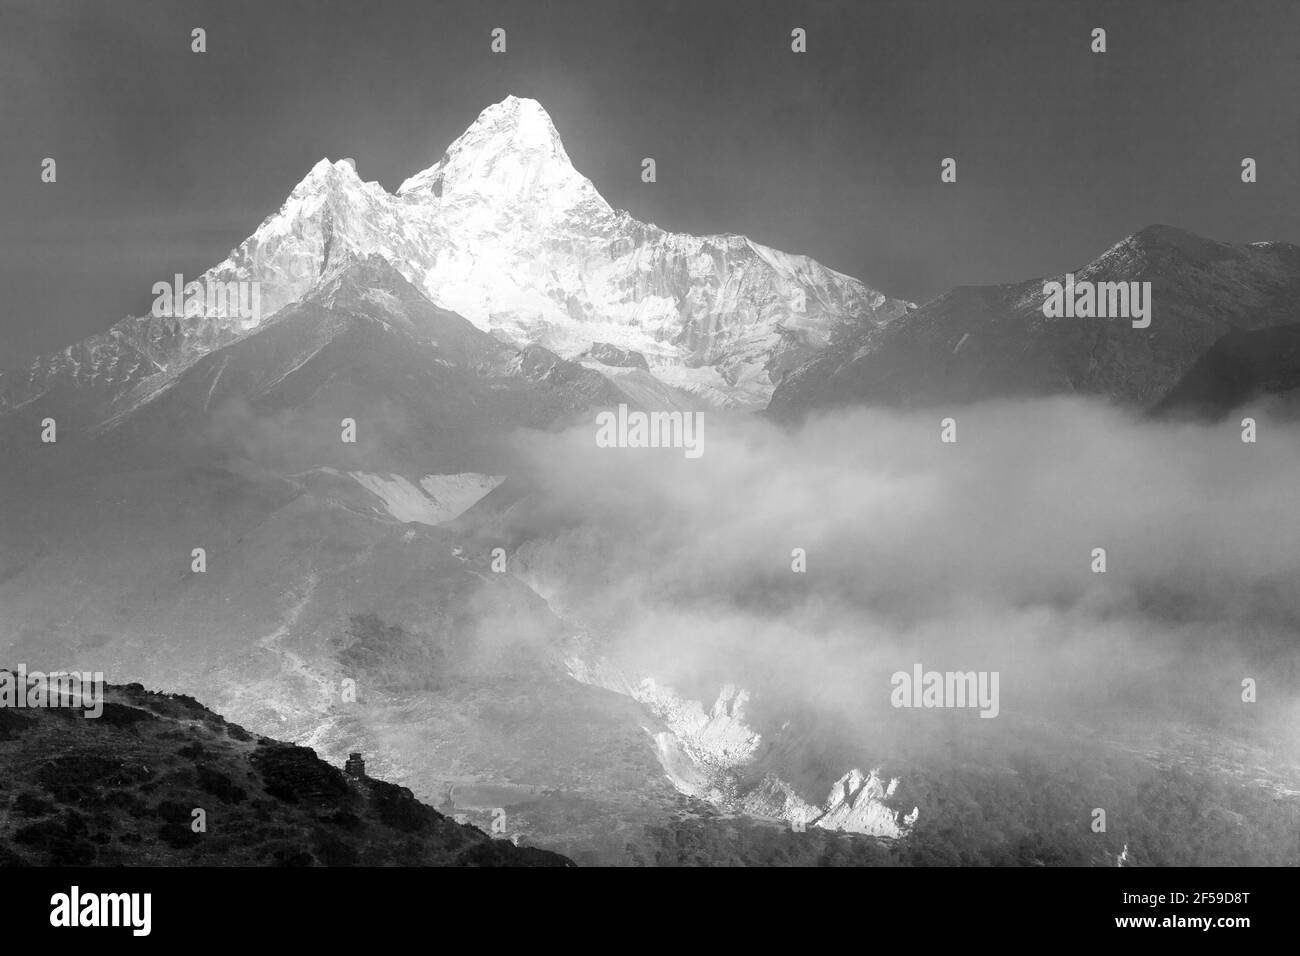 Mount Ama Dablam within clouds, black and white view, way to Everest base camp, Khumbu valley, Sagarmatha national park, Everest area, Nepal Stock Photo